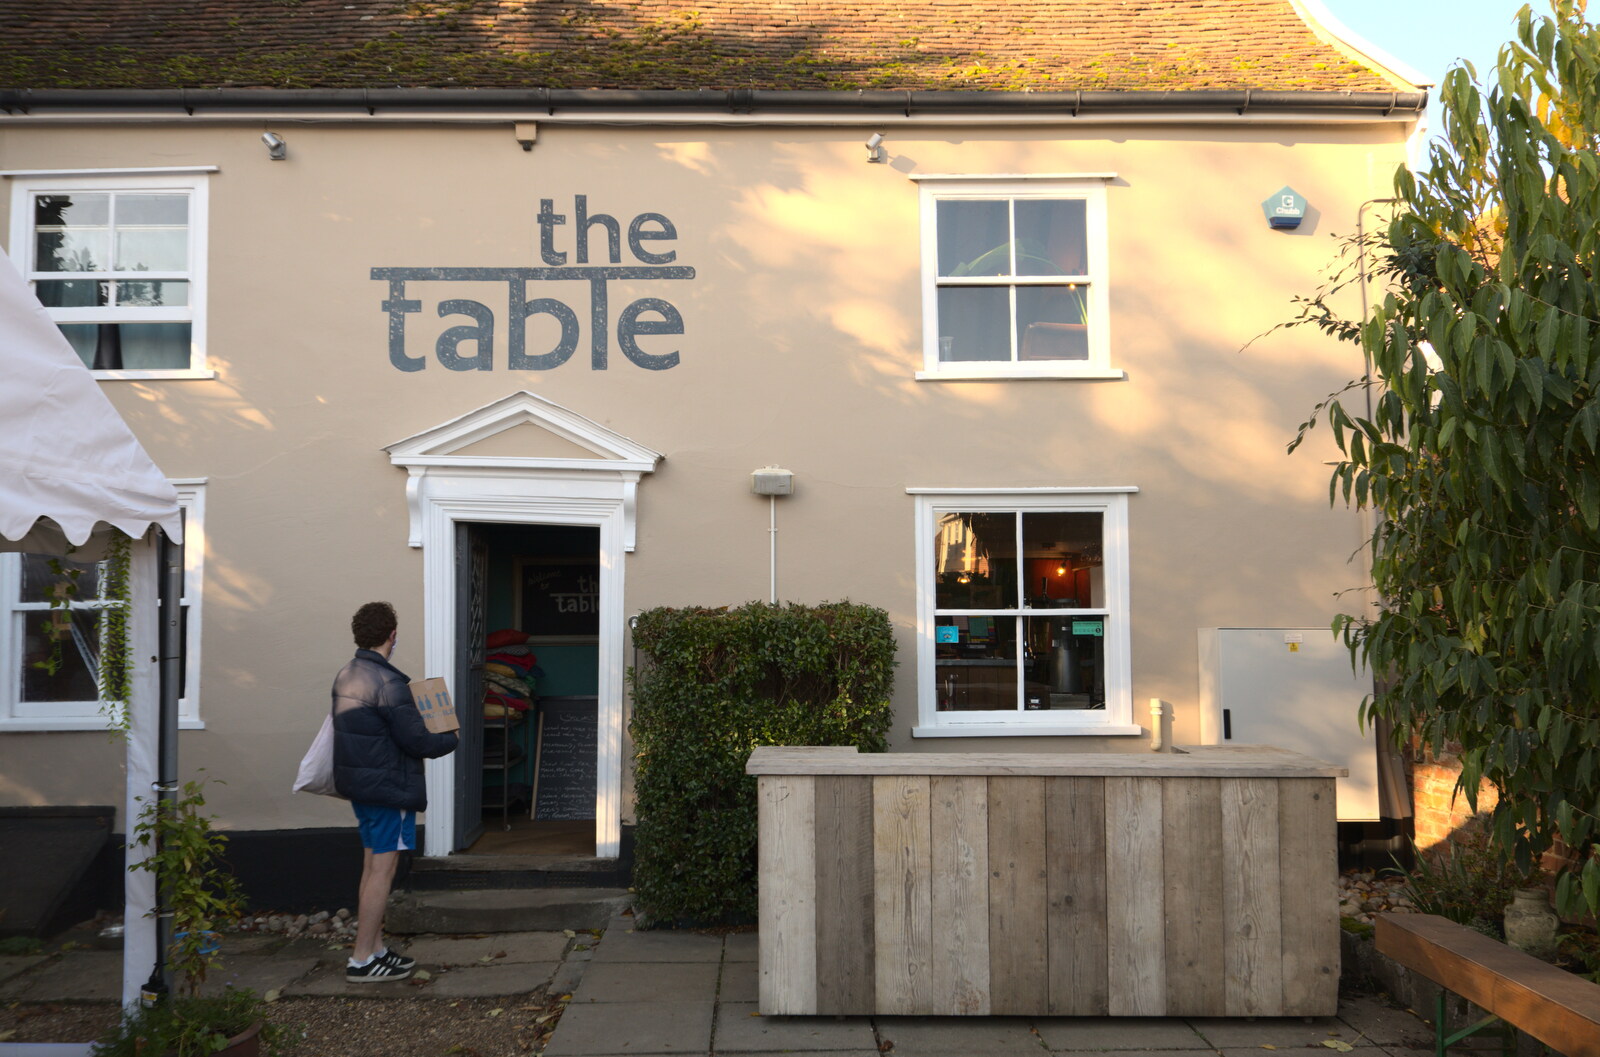 A delivery dude waits outside the café from Isobel's Birthday, Woodbridge, Suffolk - 2nd November 2020